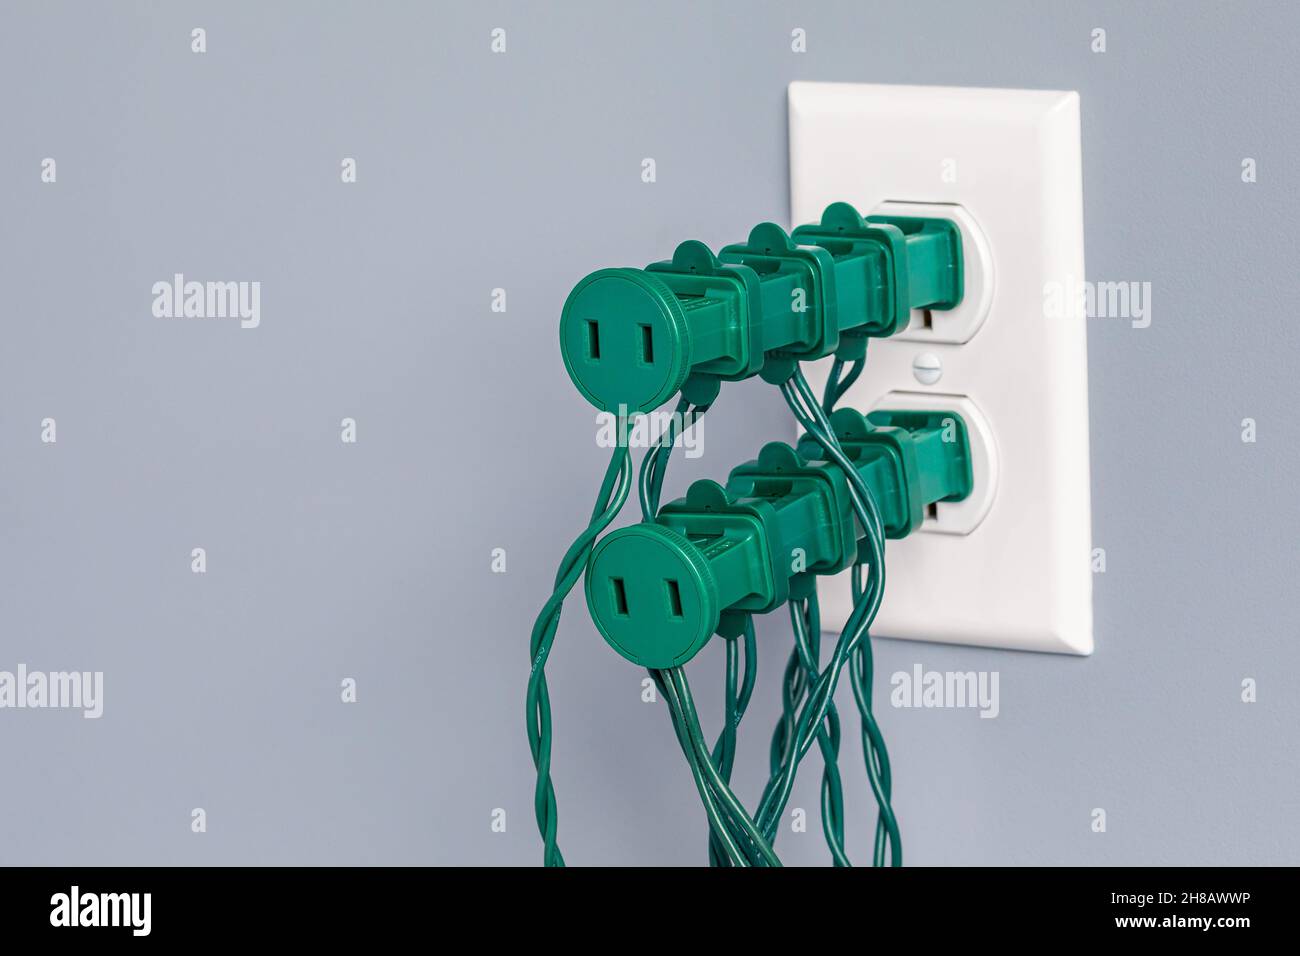 Electrical outlet overloaded with Christmas string lights. Holiday decoration safety, hazards and fire prevention concept. Stock Photo